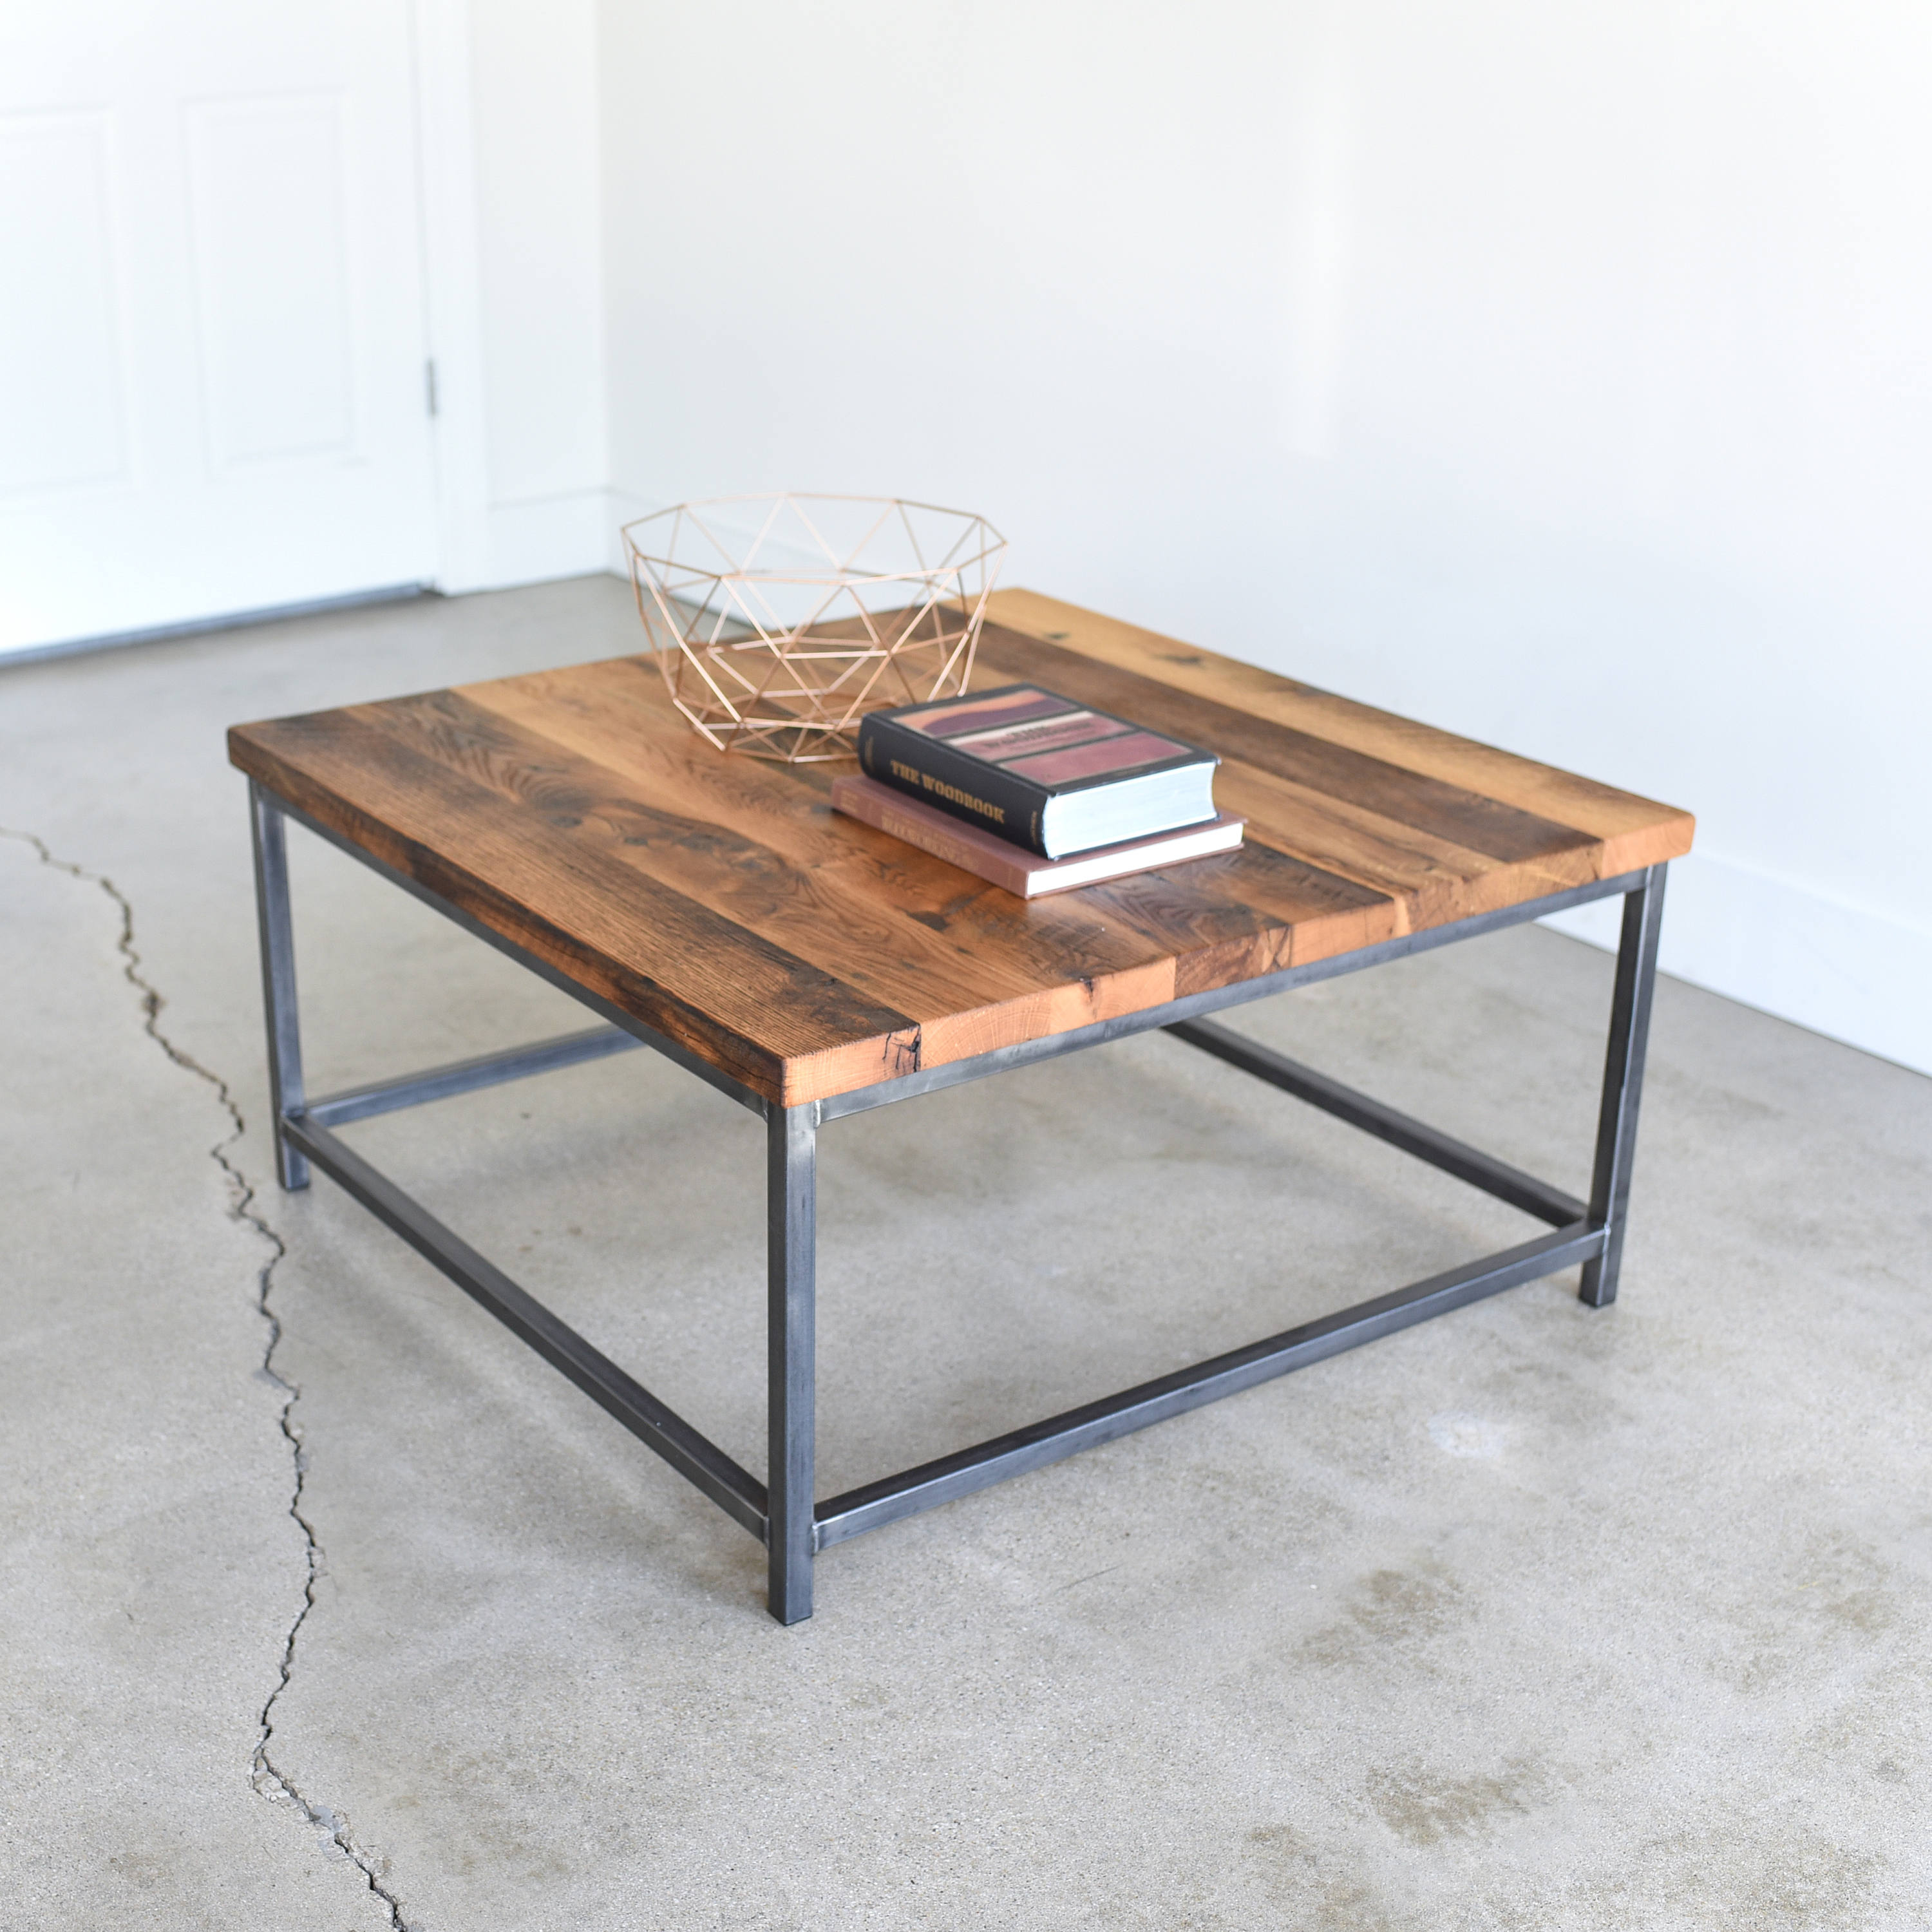 Square Coffee Table Rustic Reclaimed Wood And Steel Box Etsy pertaining to size 3000 X 3000